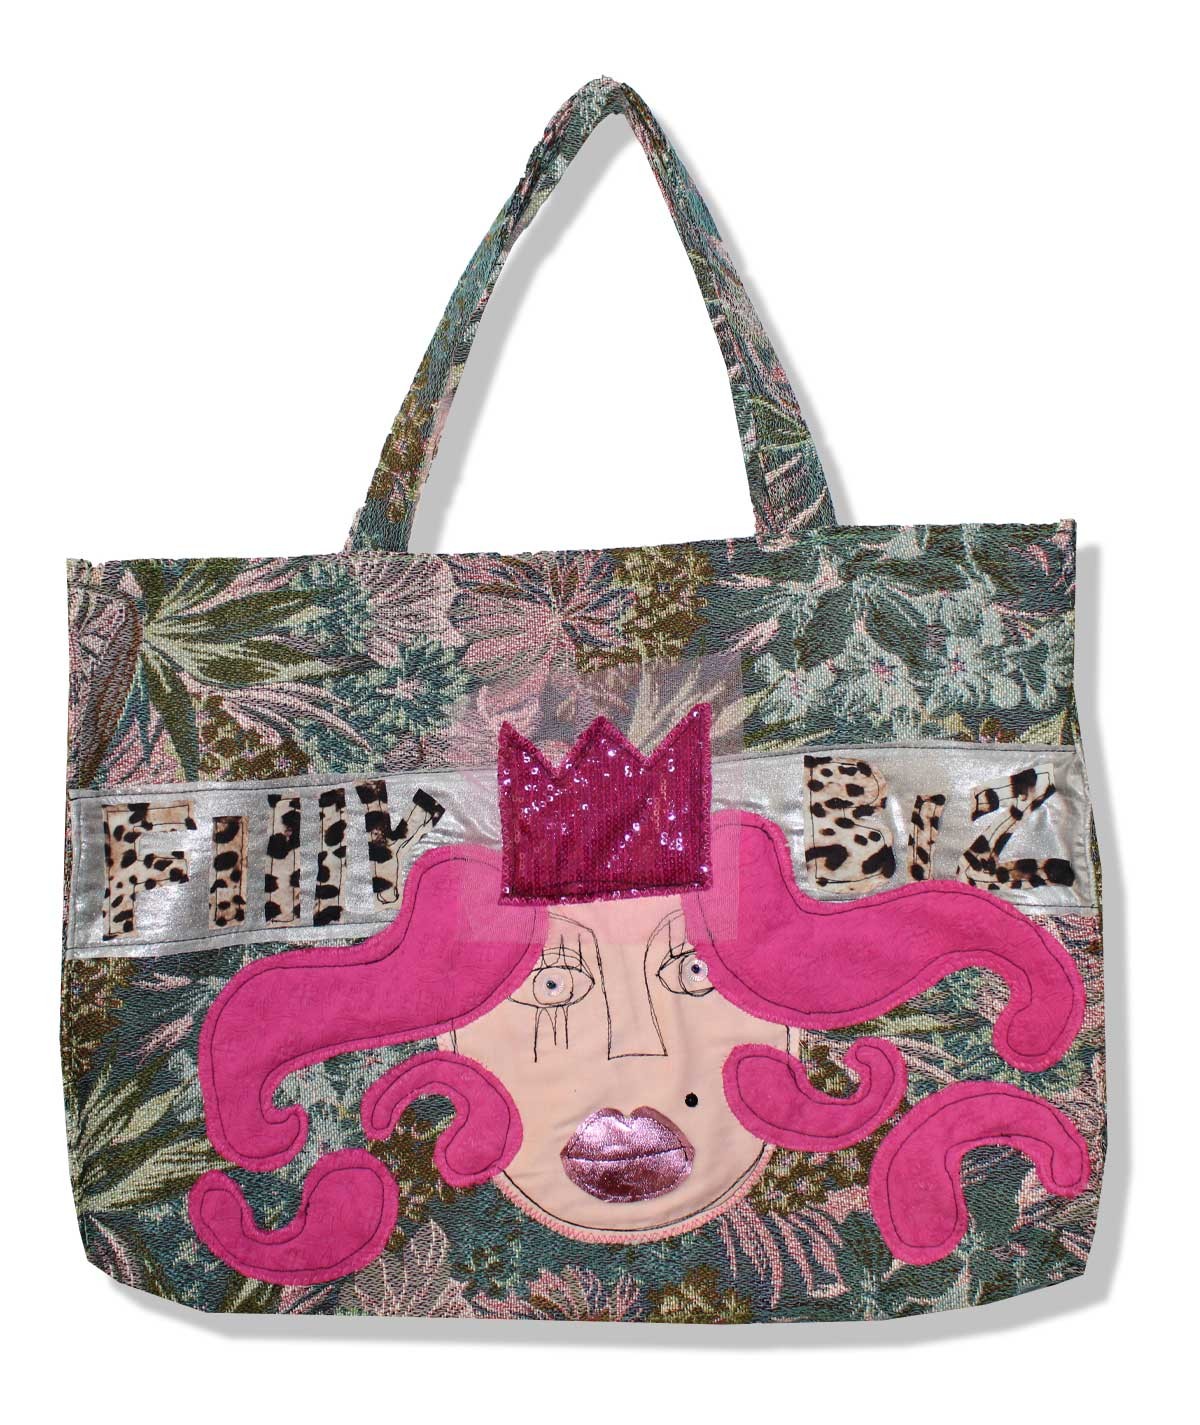 Fabric tote bag with the face